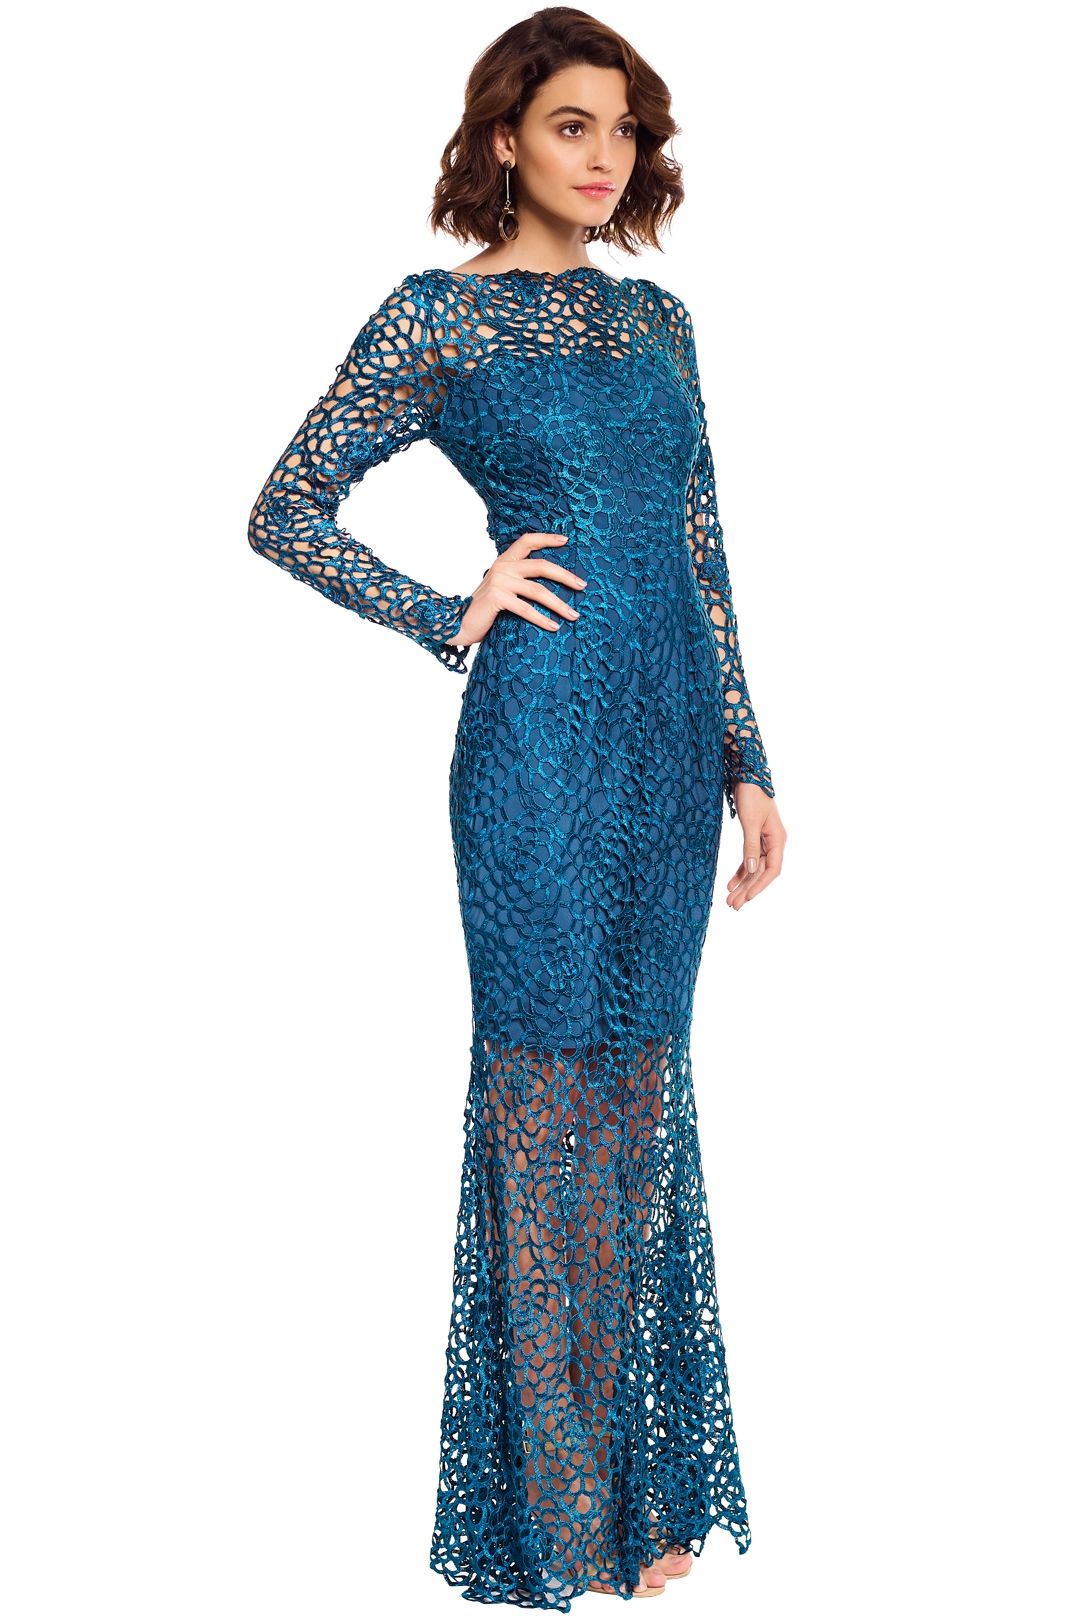 Grace and Hart - Scandal Gown - Teal - Side